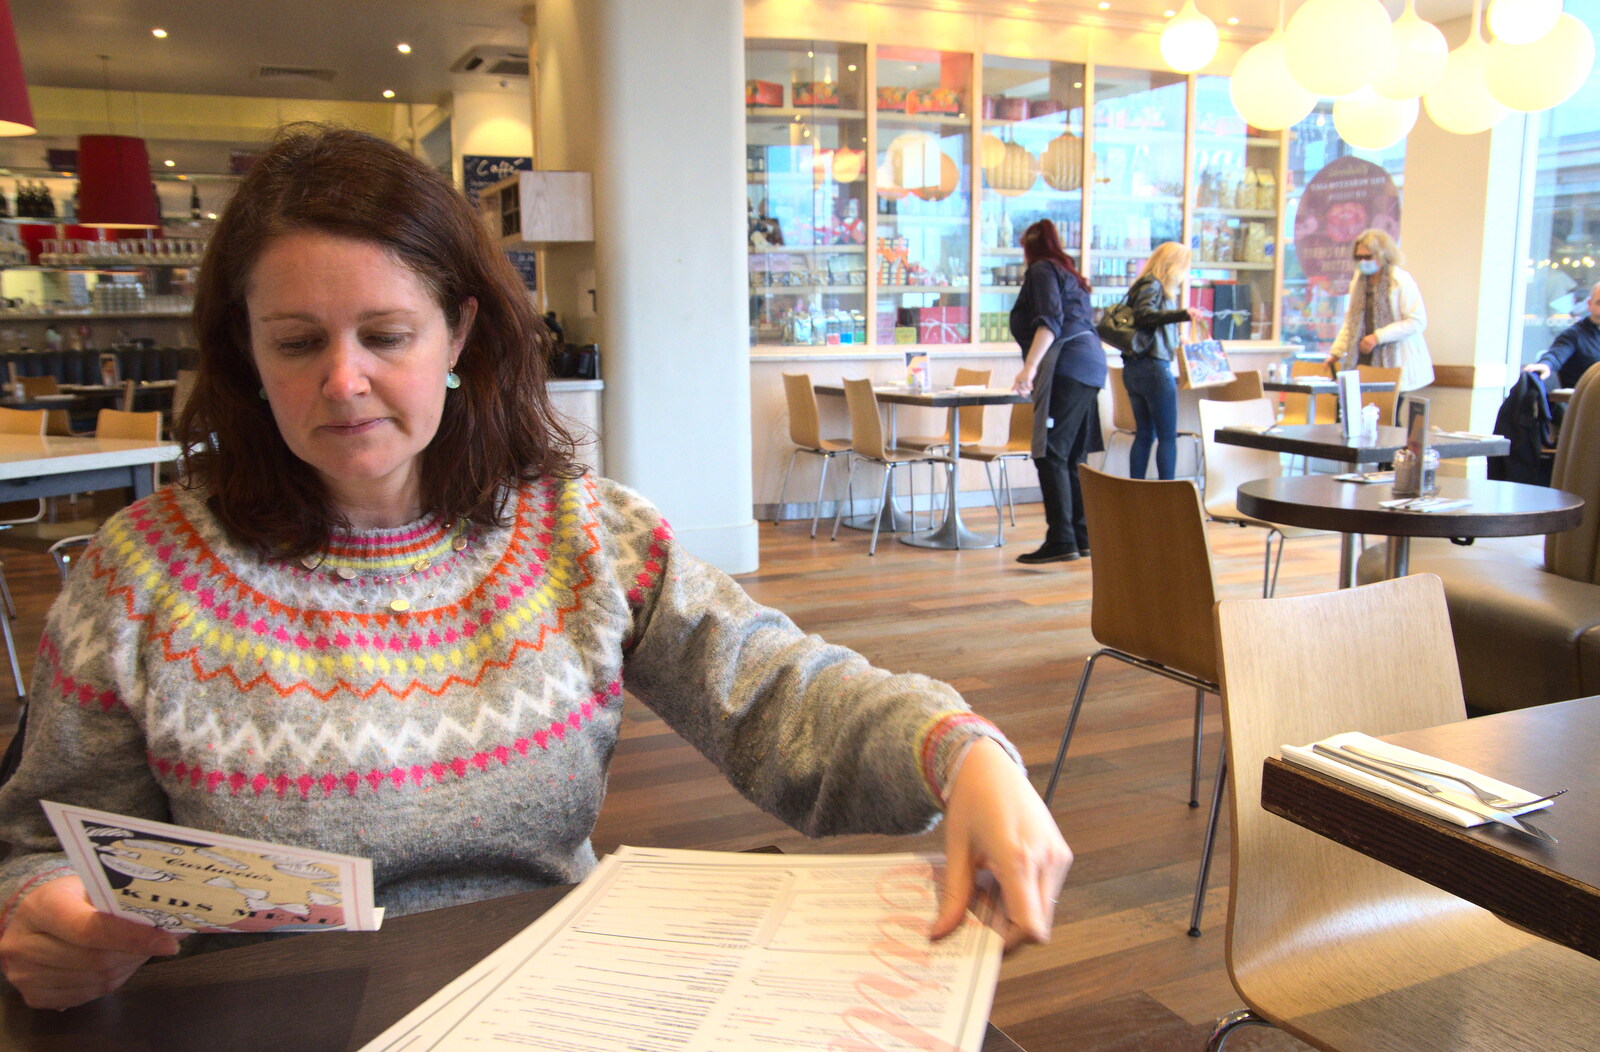 Isobel checks the menu from A Few Hours in Bury St. Edmunds, Suffolk - 3rd January 2022